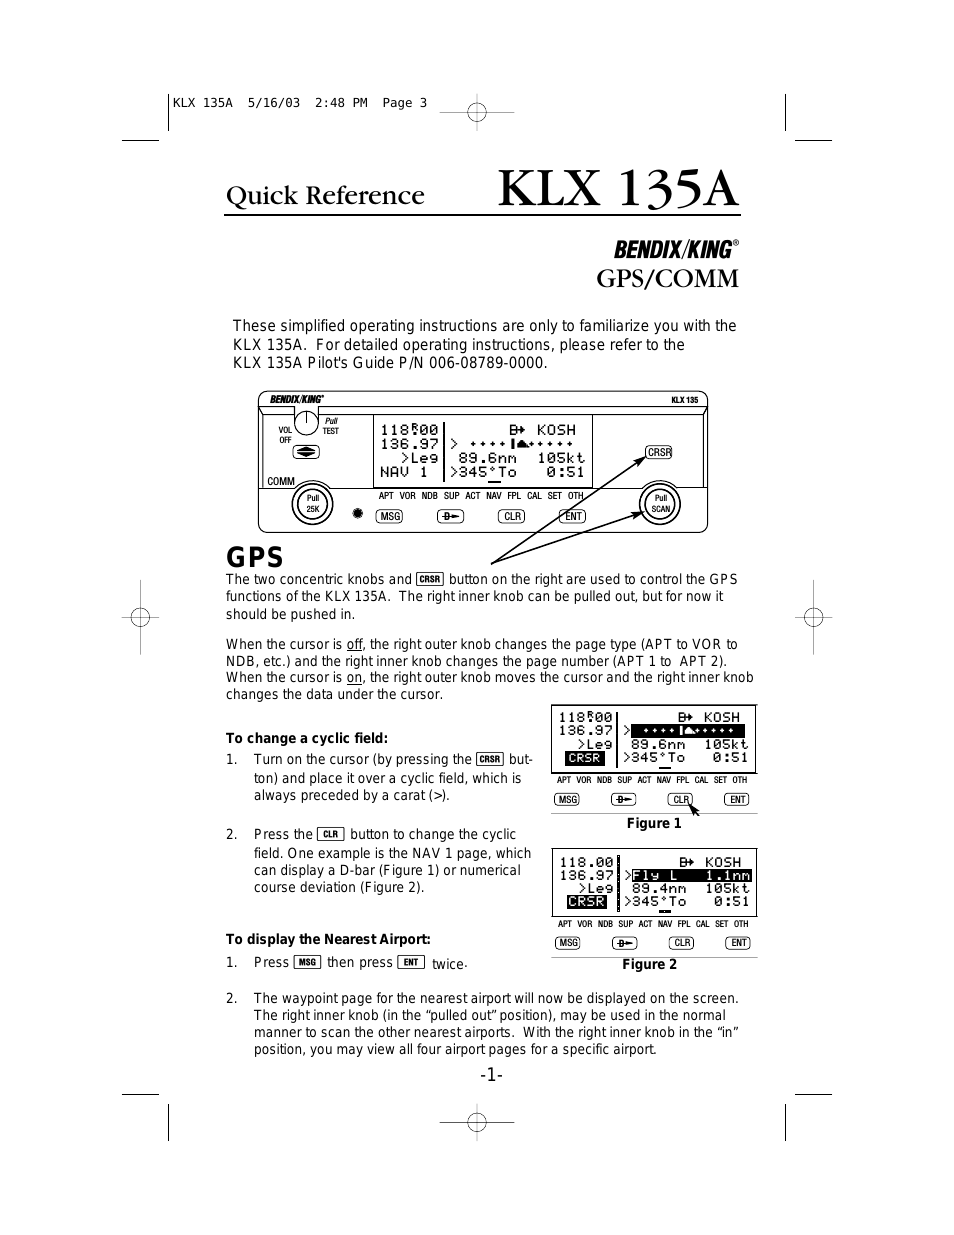 KLX 135A - Quick Reference Guide